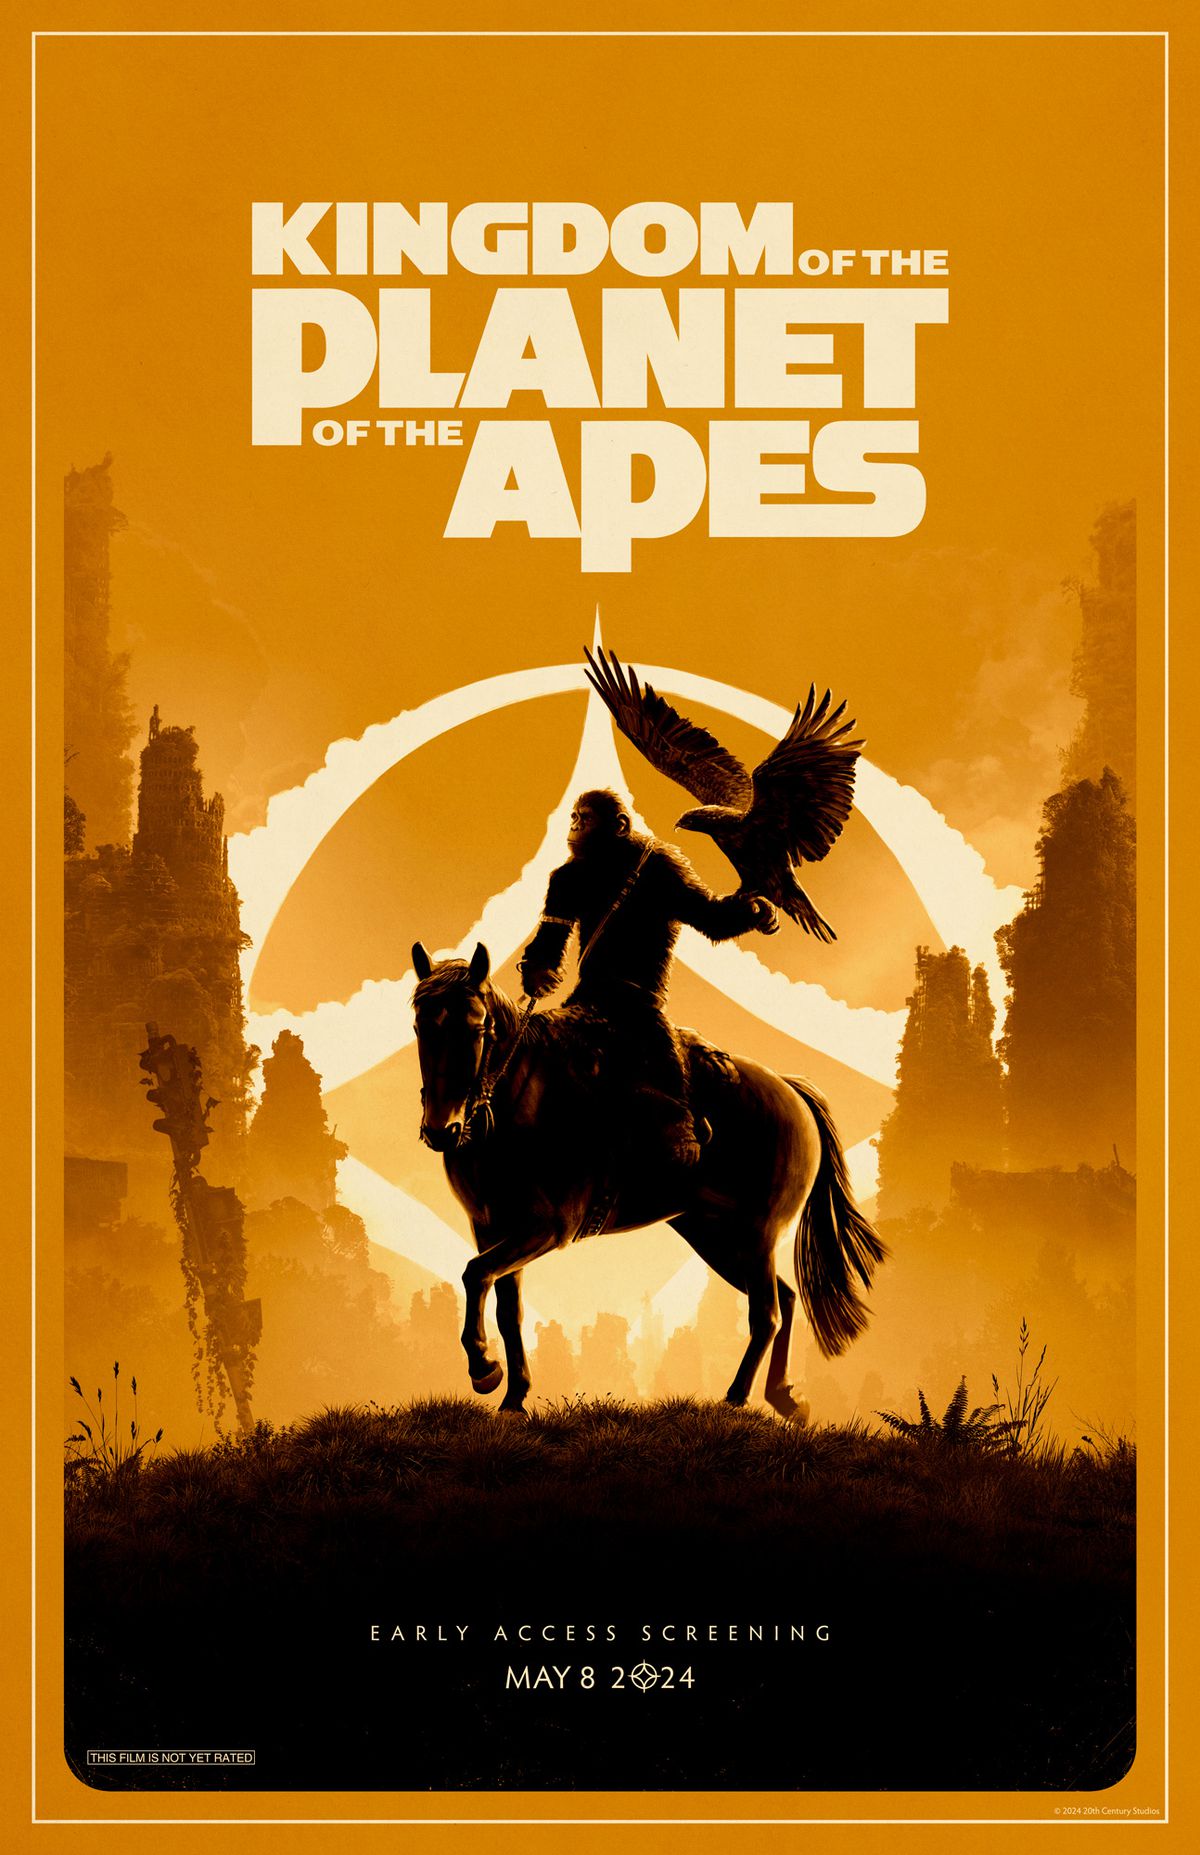 A stylized poster for Kingdom of the Planet of the Apes shows the chimp Noa on horseback, in silhouette, with an eagle on his arm, all at the top of a rise, with the symbol of the ape leader Caesar behind him and a vivid yellow-orange background